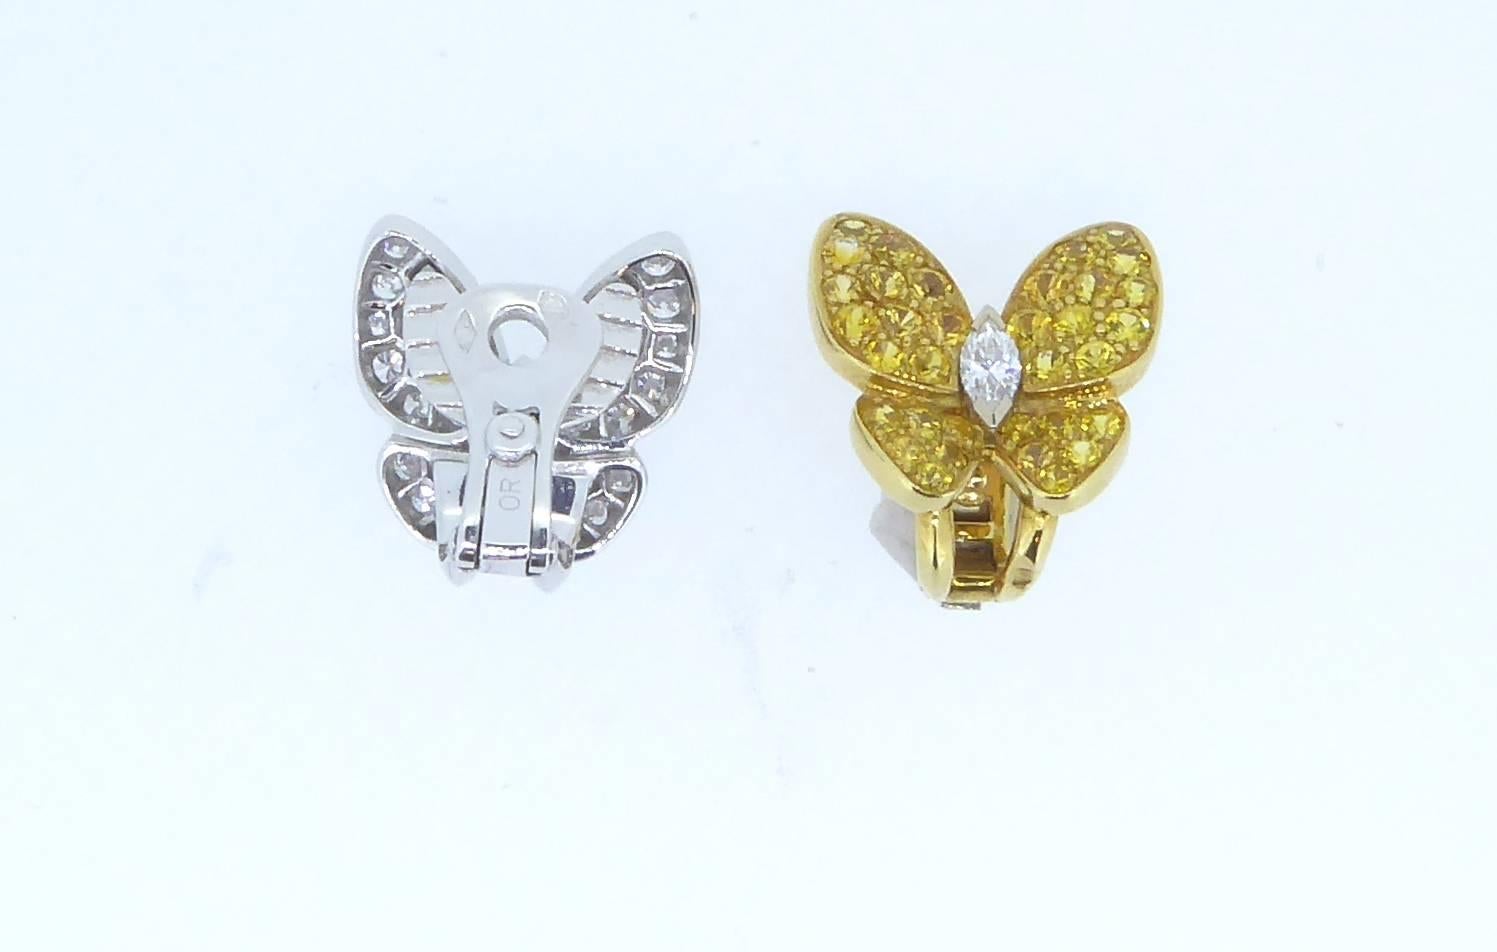 A pair of Van Cleef & Arpels Yellow Sapphire Diamond and Gold Butterfly Earrings. One ear clip with white diamonds set in 18ct white gold and a marquise diamond body. The other ear clip with yellow sapphires set in 18ct yellow gold and a marquise